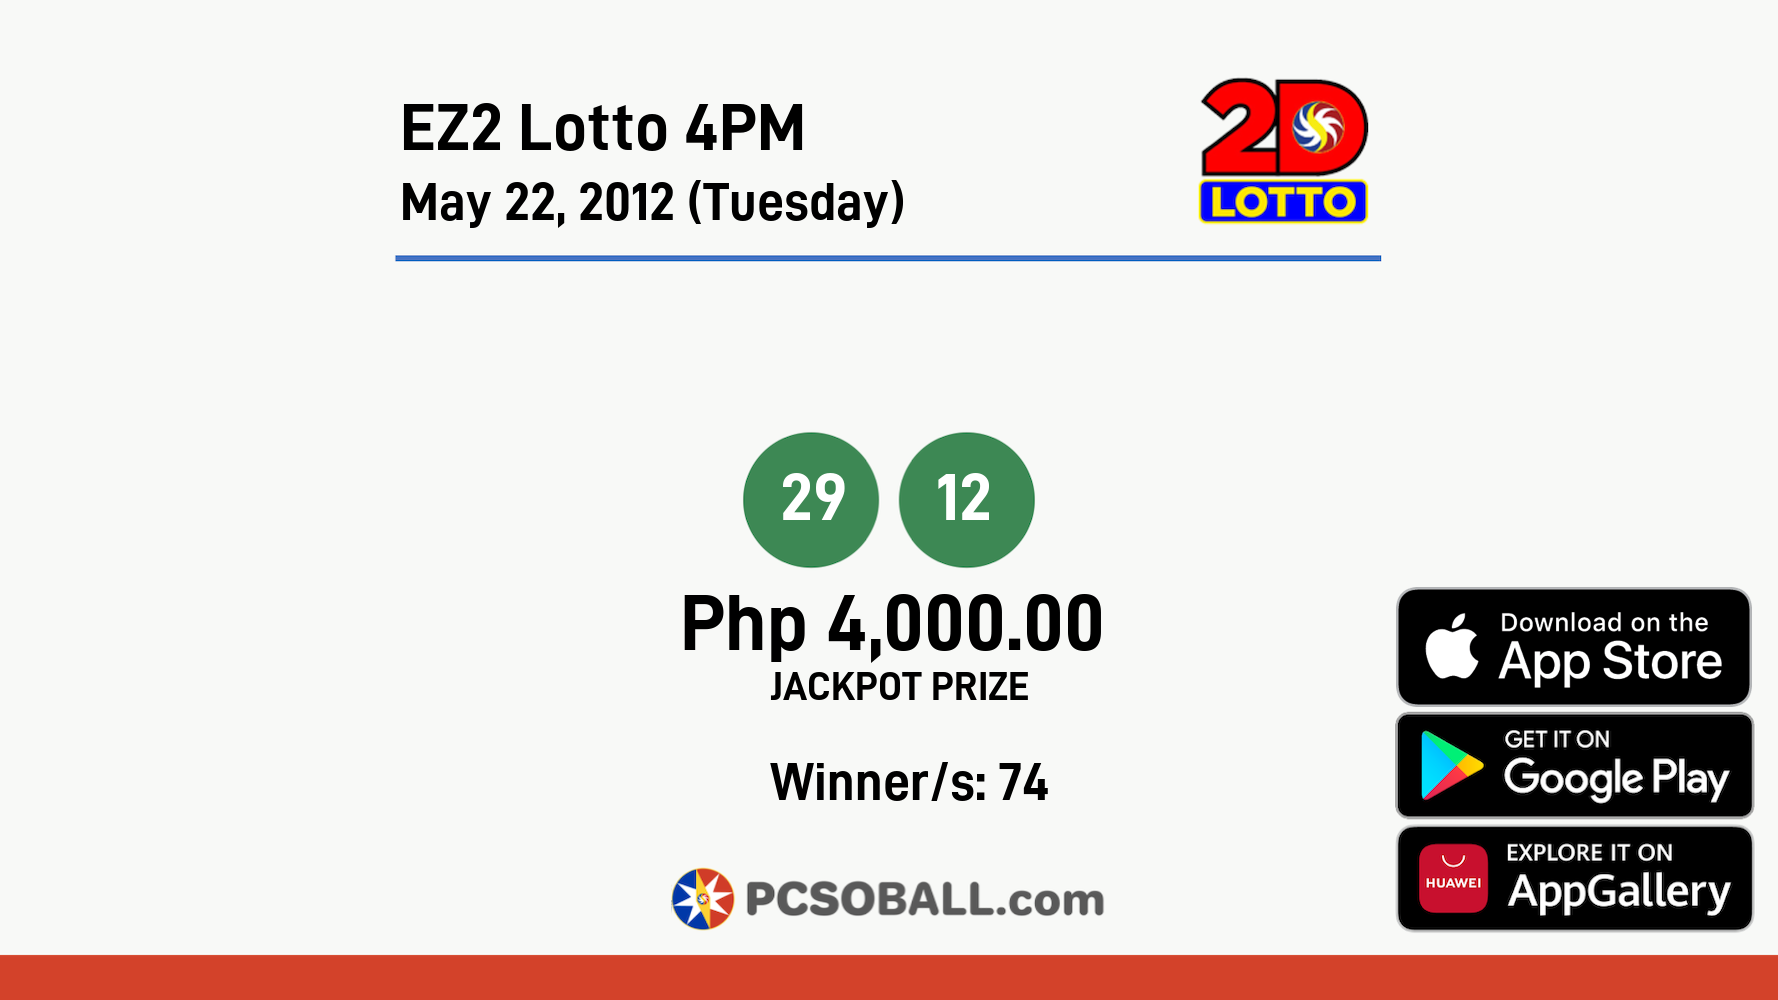 EZ2 Lotto 4PM May 22, 2012 (Tuesday) Result